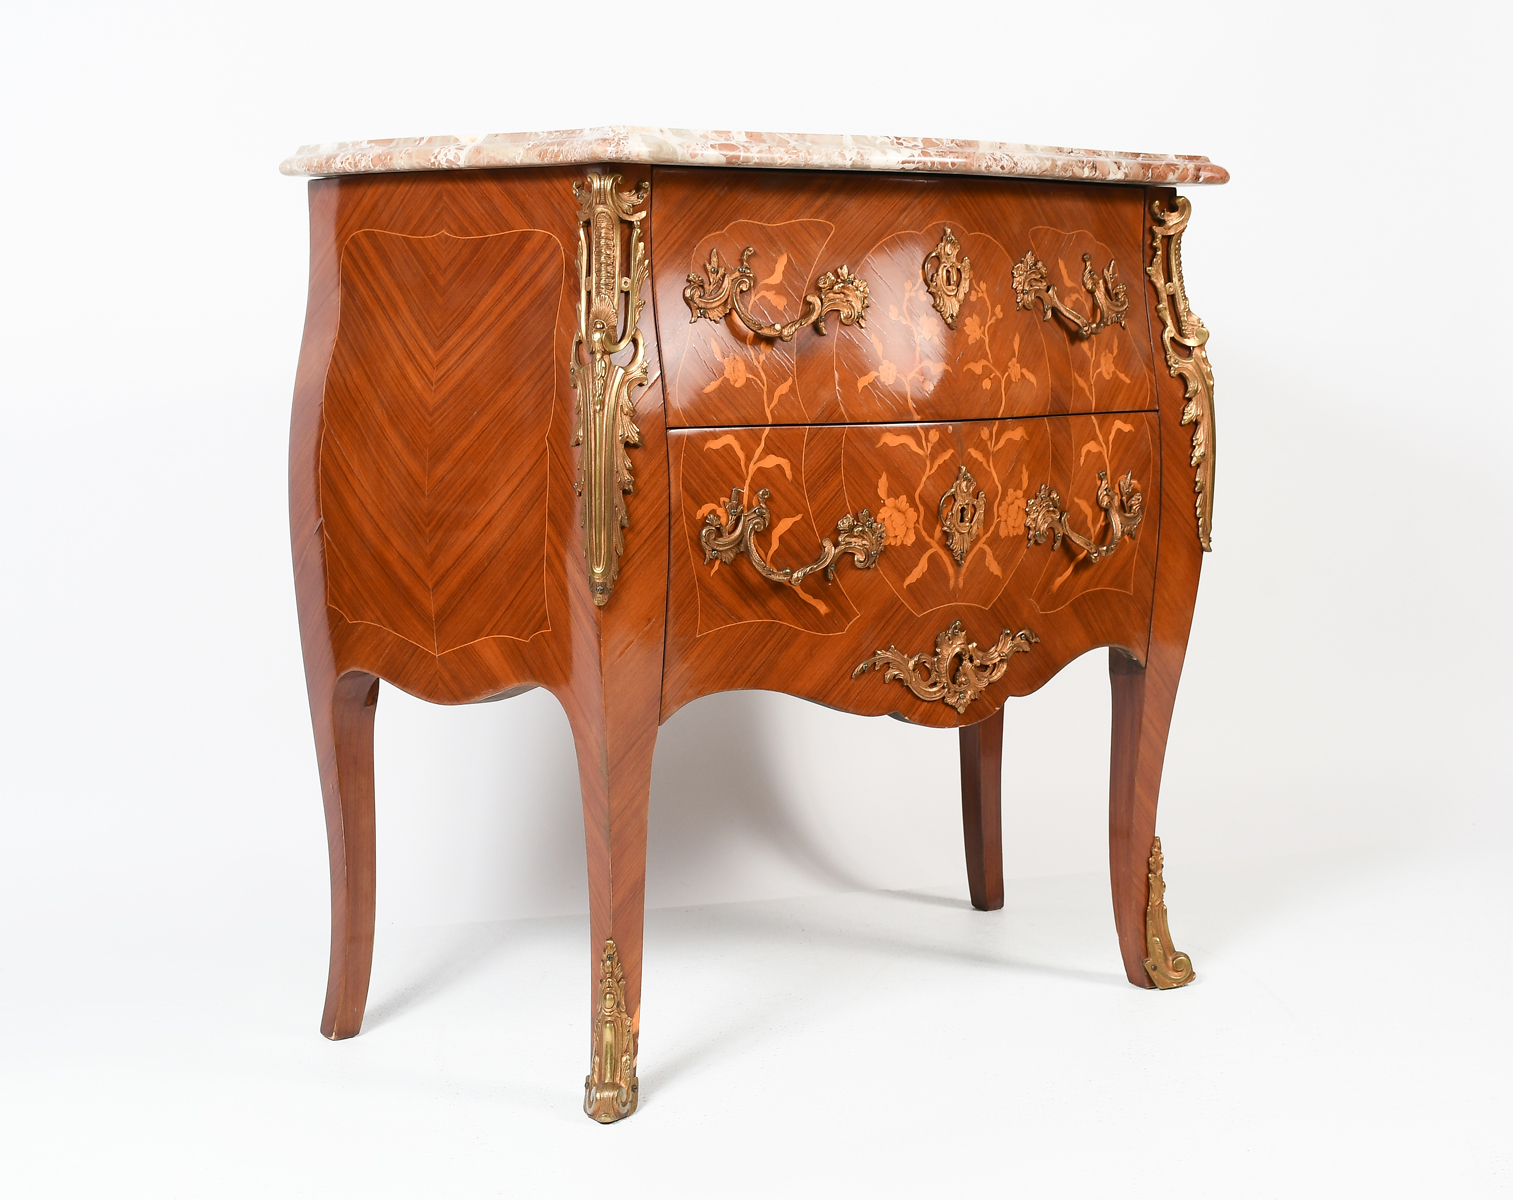 2 DRAWER BOMBAY MARBLE TOP COMMODE  2ecd34